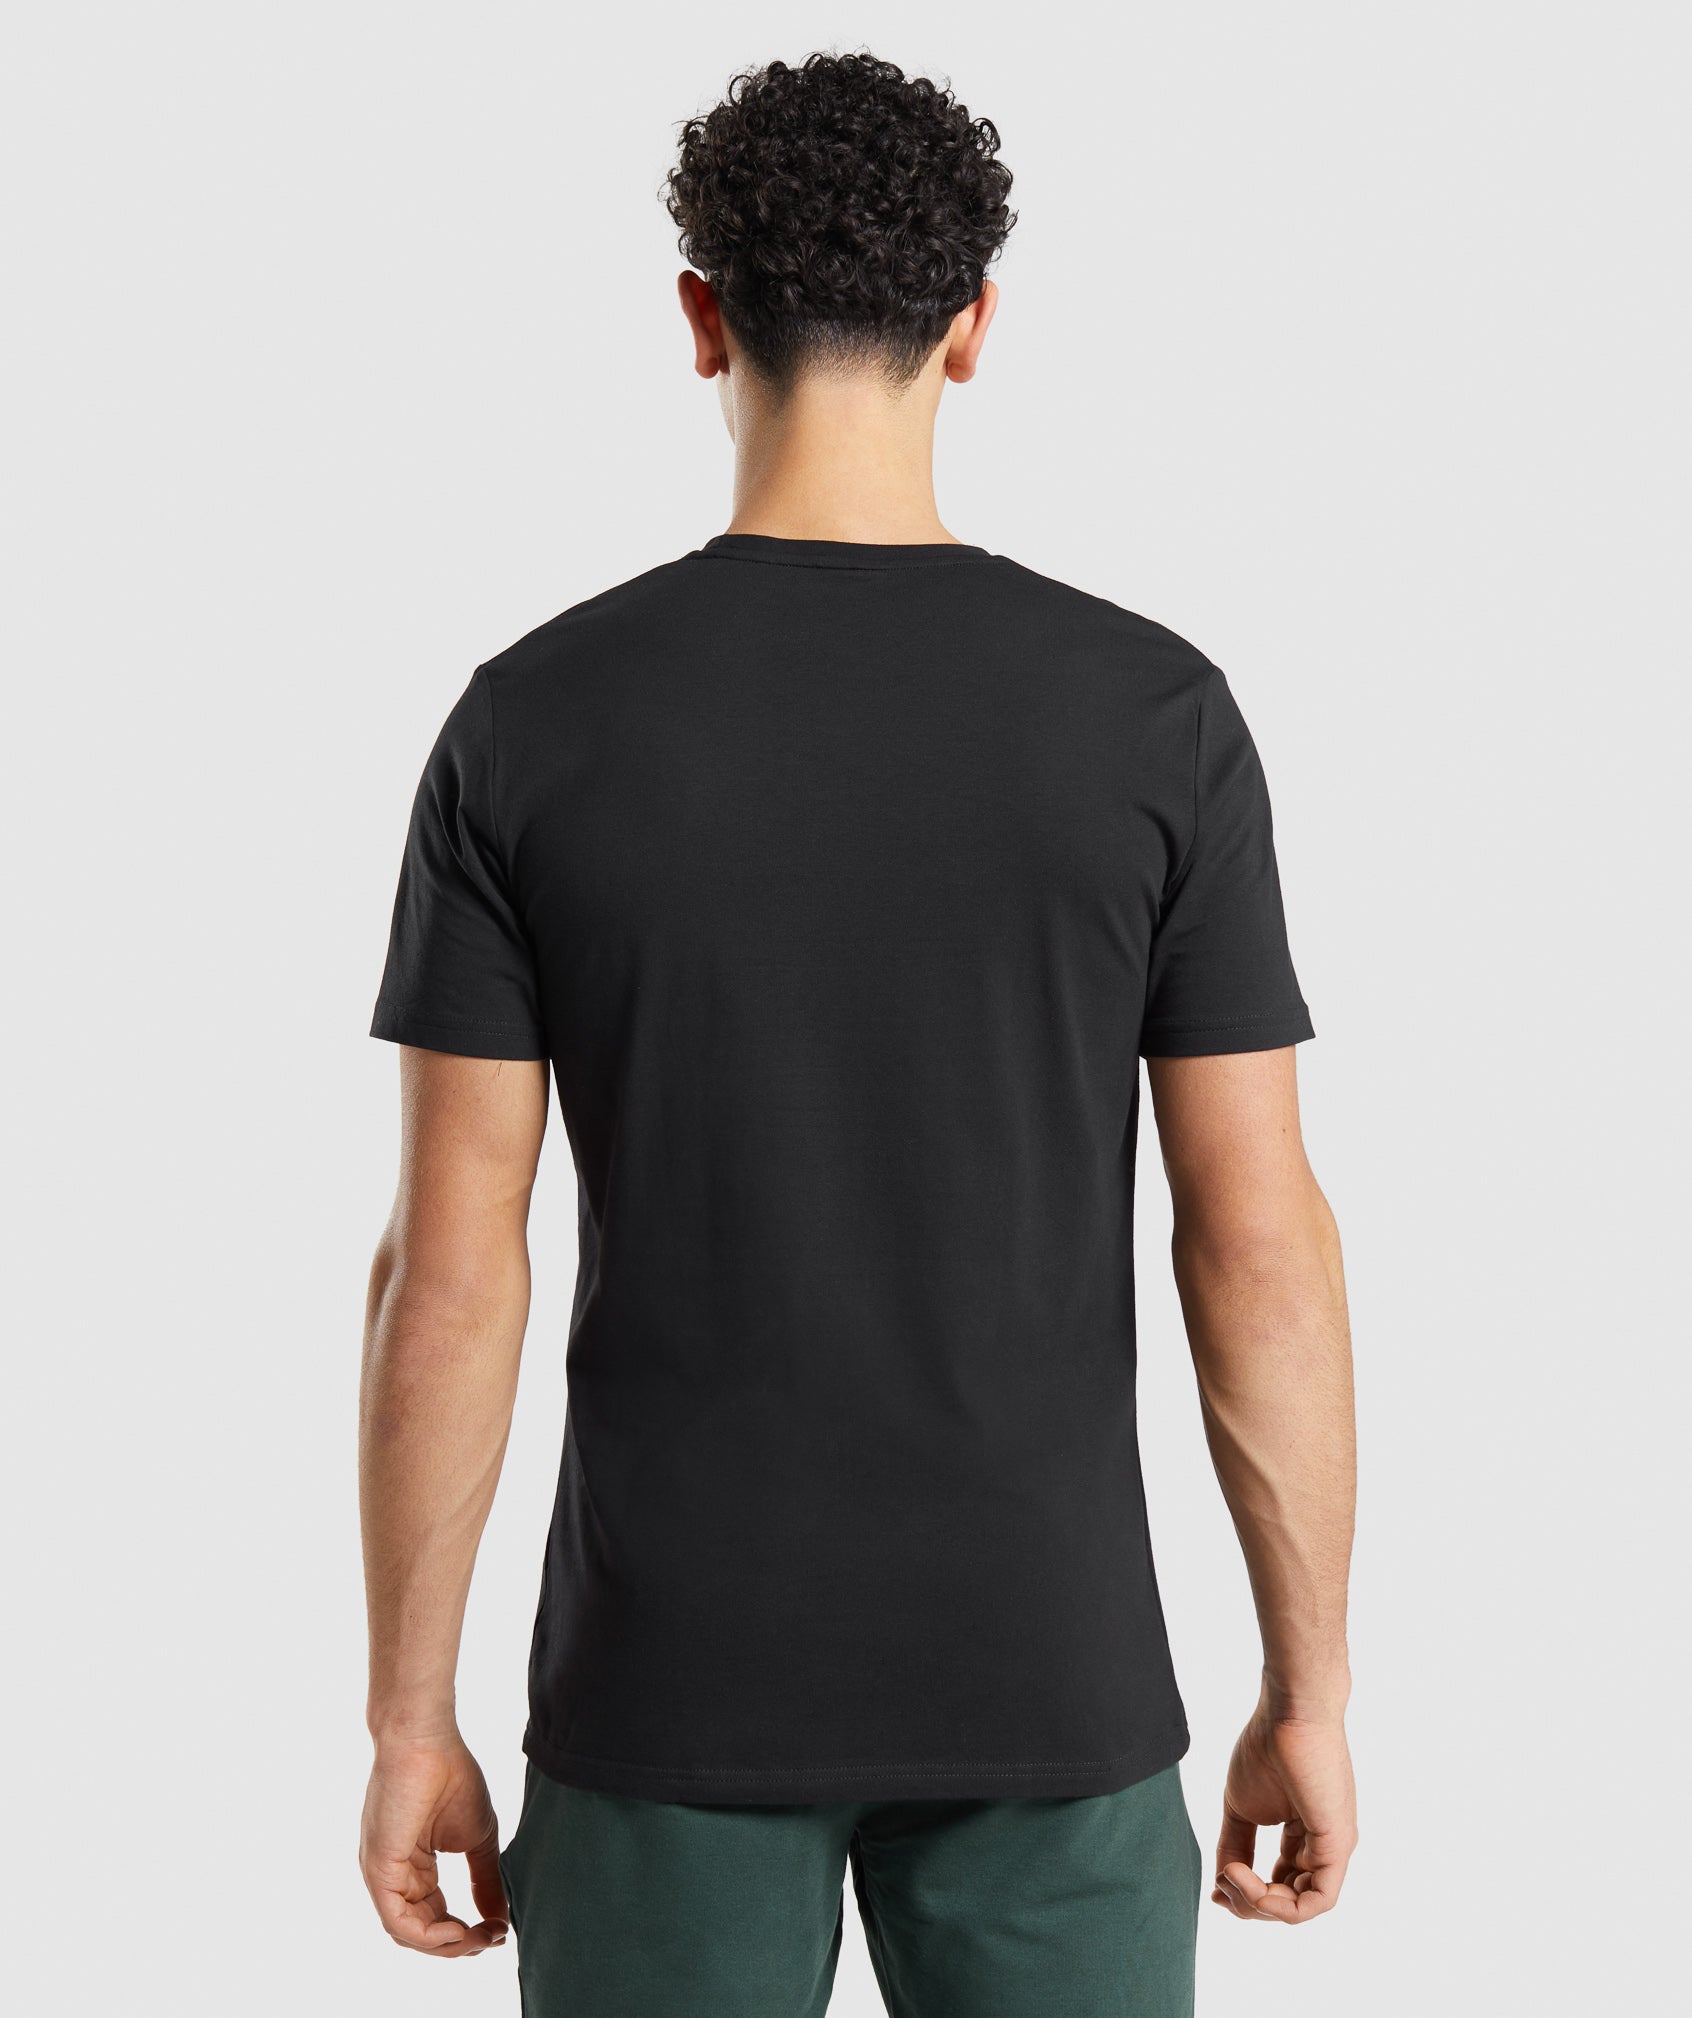 Essential T-Shirt in Black - view 2